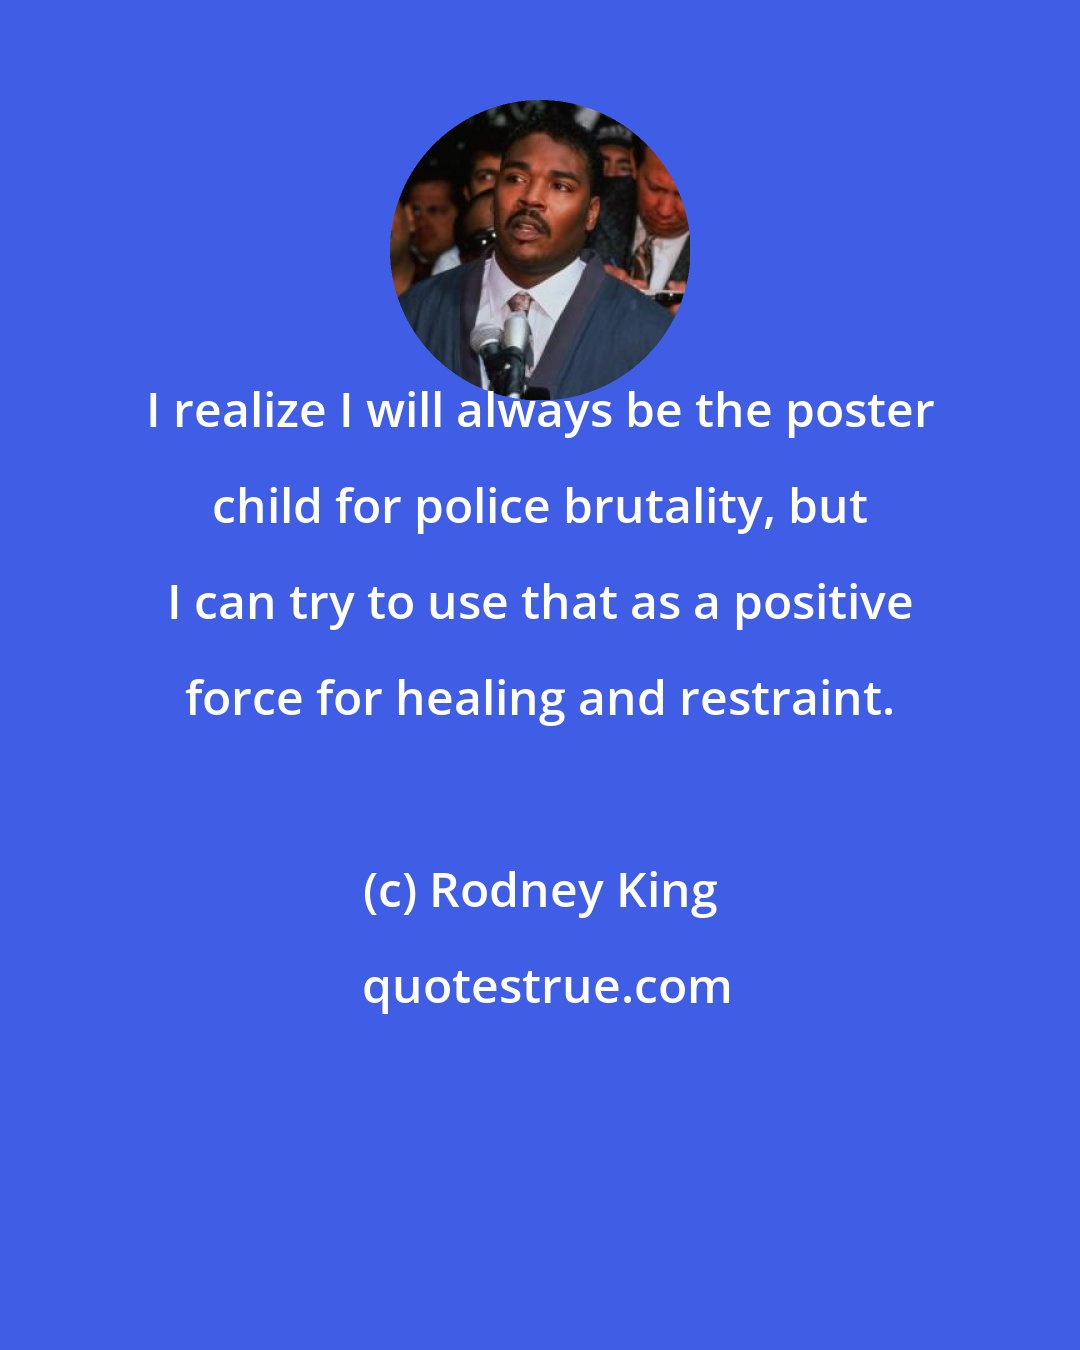 Rodney King: I realize I will always be the poster child for police brutality, but I can try to use that as a positive force for healing and restraint.